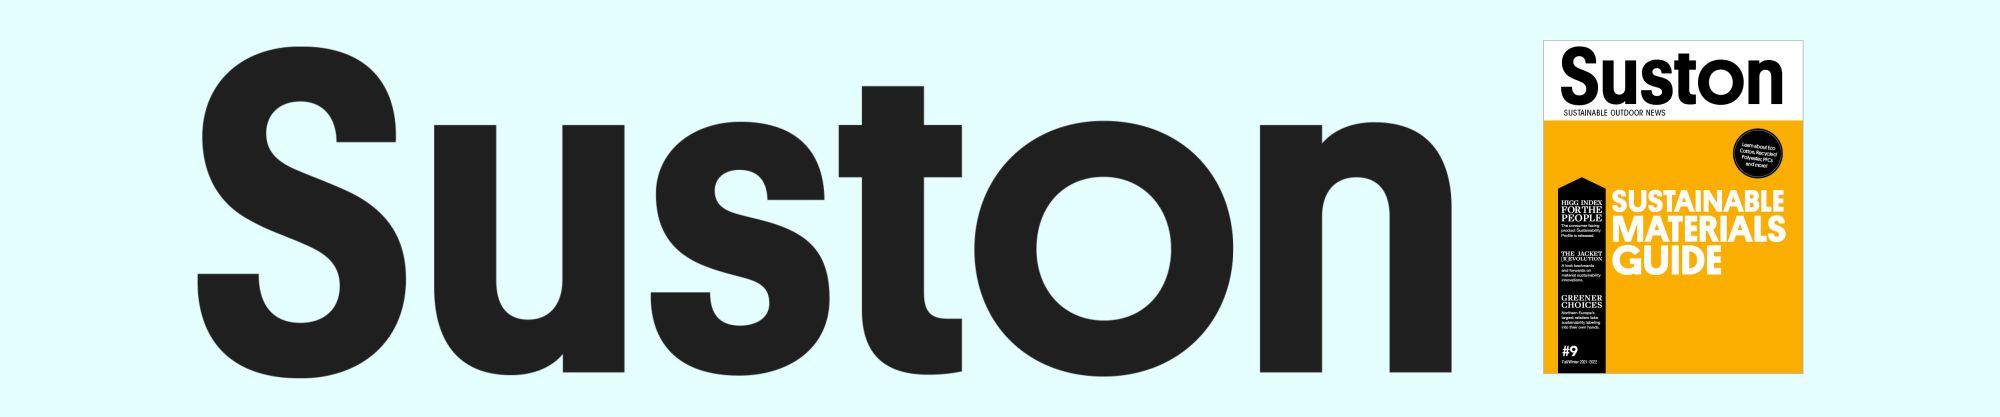 Suston – Sustainable Outdoor News, is an international B2B-magazine and an editorial website covering sustainability and CSR within the outdoor community. Suston Magazine was launched in 2017, with the mission to educate, inspire and push the outdoor indu